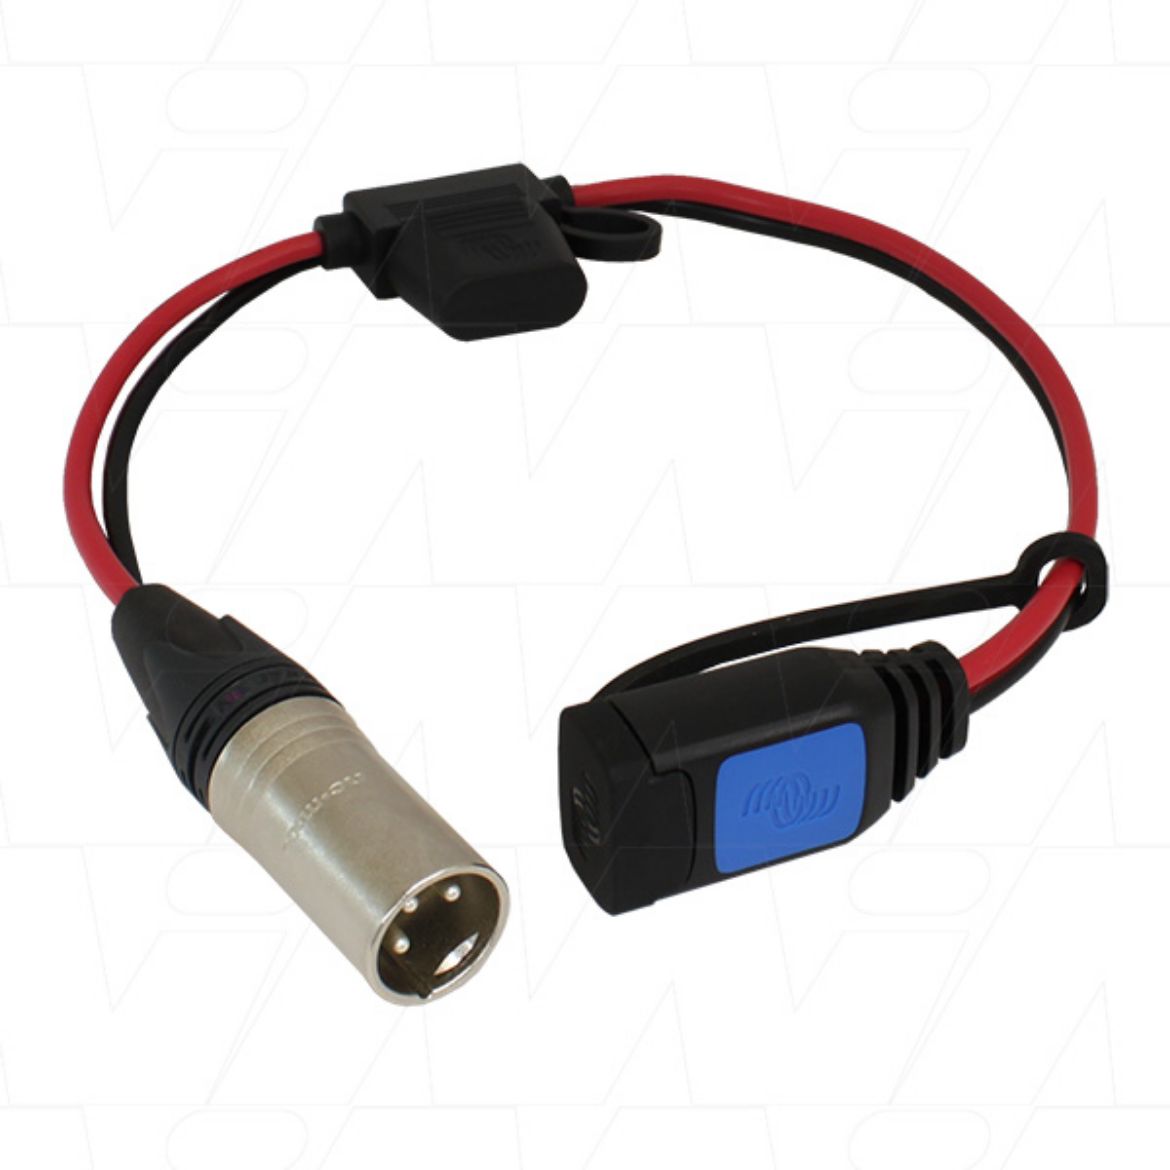 Picture of LEAD TO XLR 3-PiN CONNECTOR WITH 30A AUTO BLADE FUSE - SUITS IP65 VICTRON CHARGERS (BPC900100004XLR)